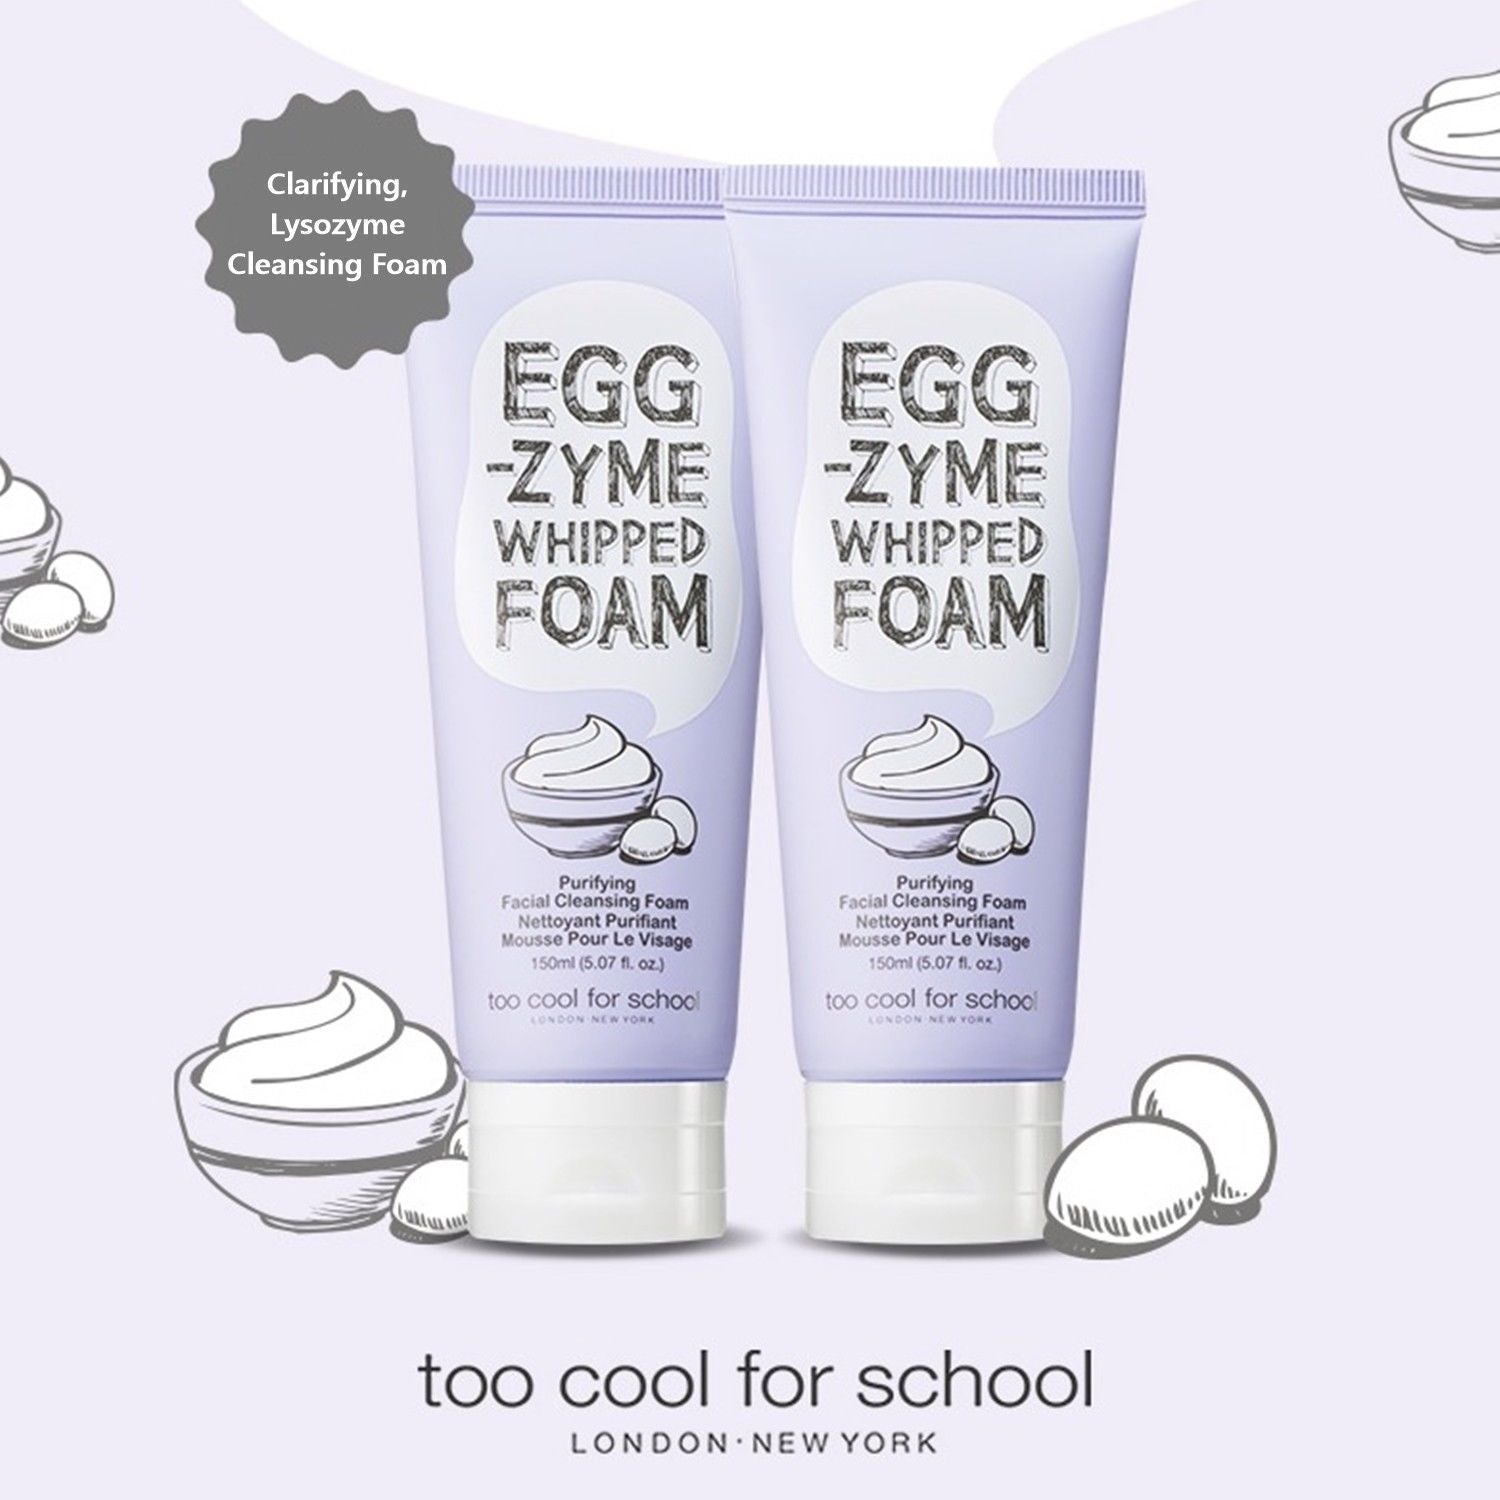 Egg-Zyme Whipped Foam Too Cool For School Detergenti & Struccanti